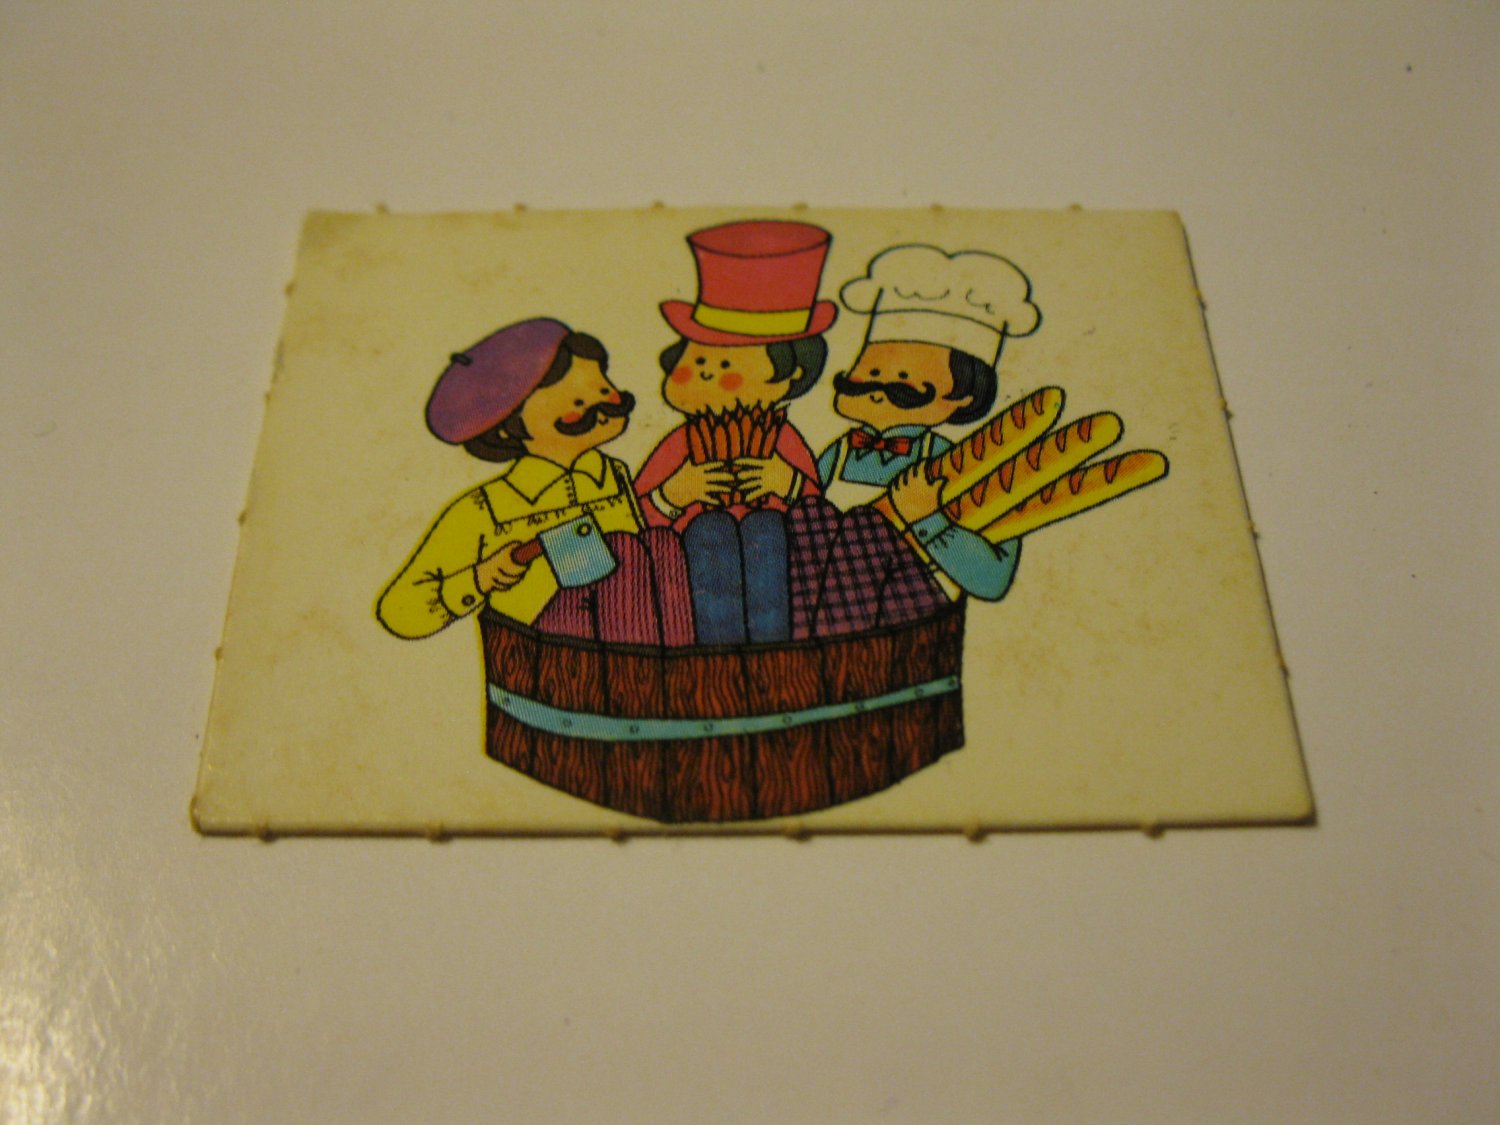 1971 Mother Goose Board Game Piece: Game card #13